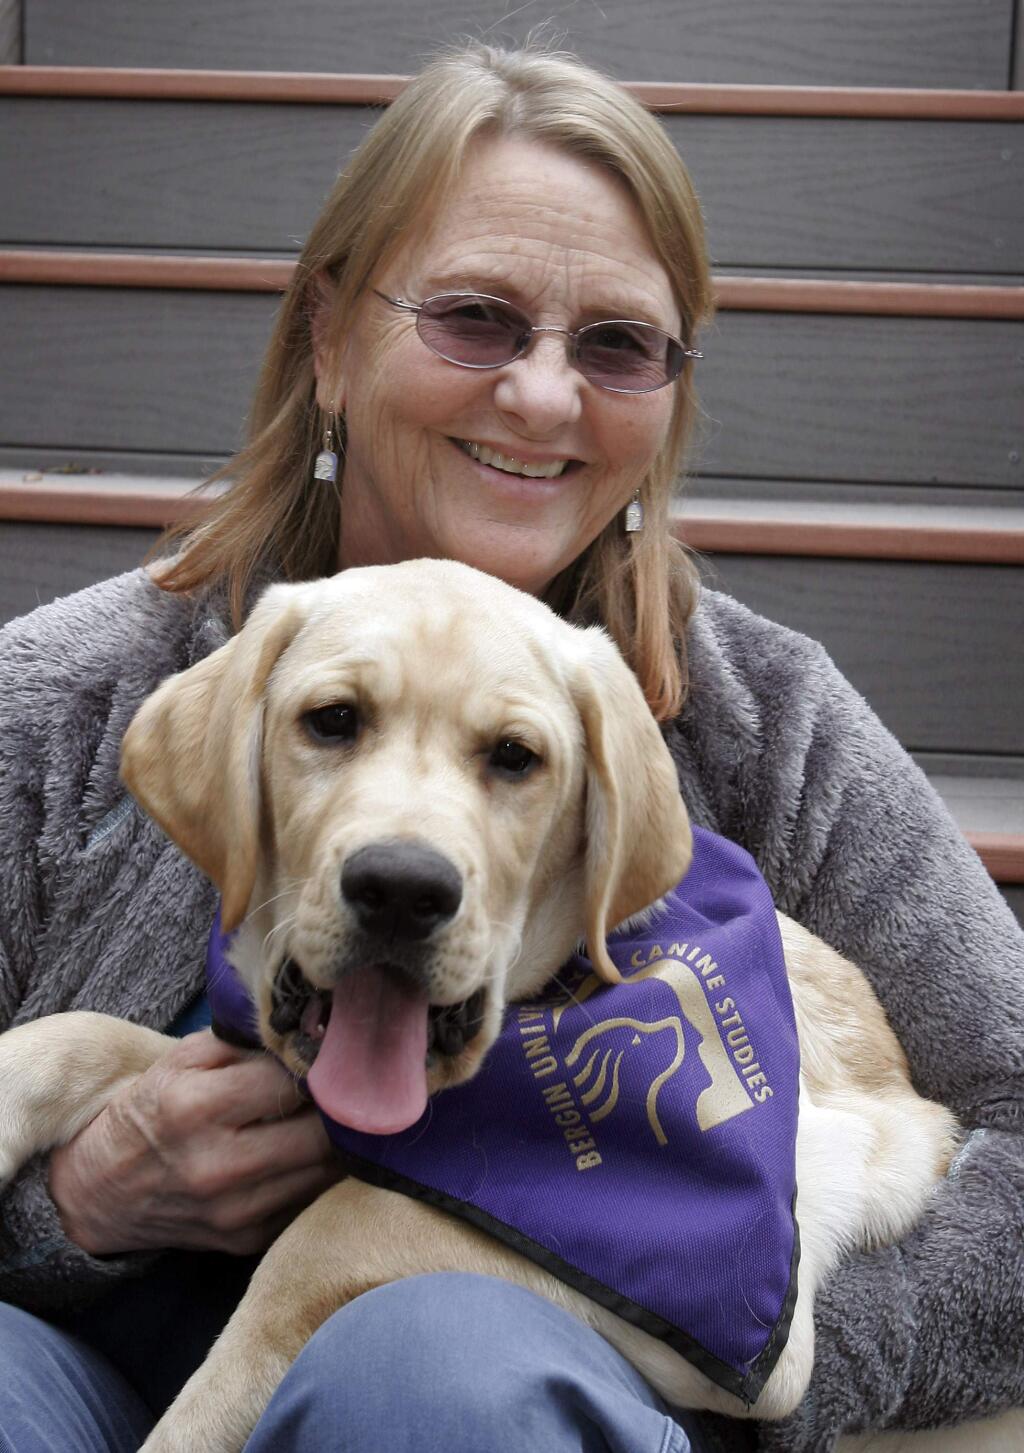 Bonnie Bergin founded Canine companions and Assistance Dog Institute, which has evolved into a college.